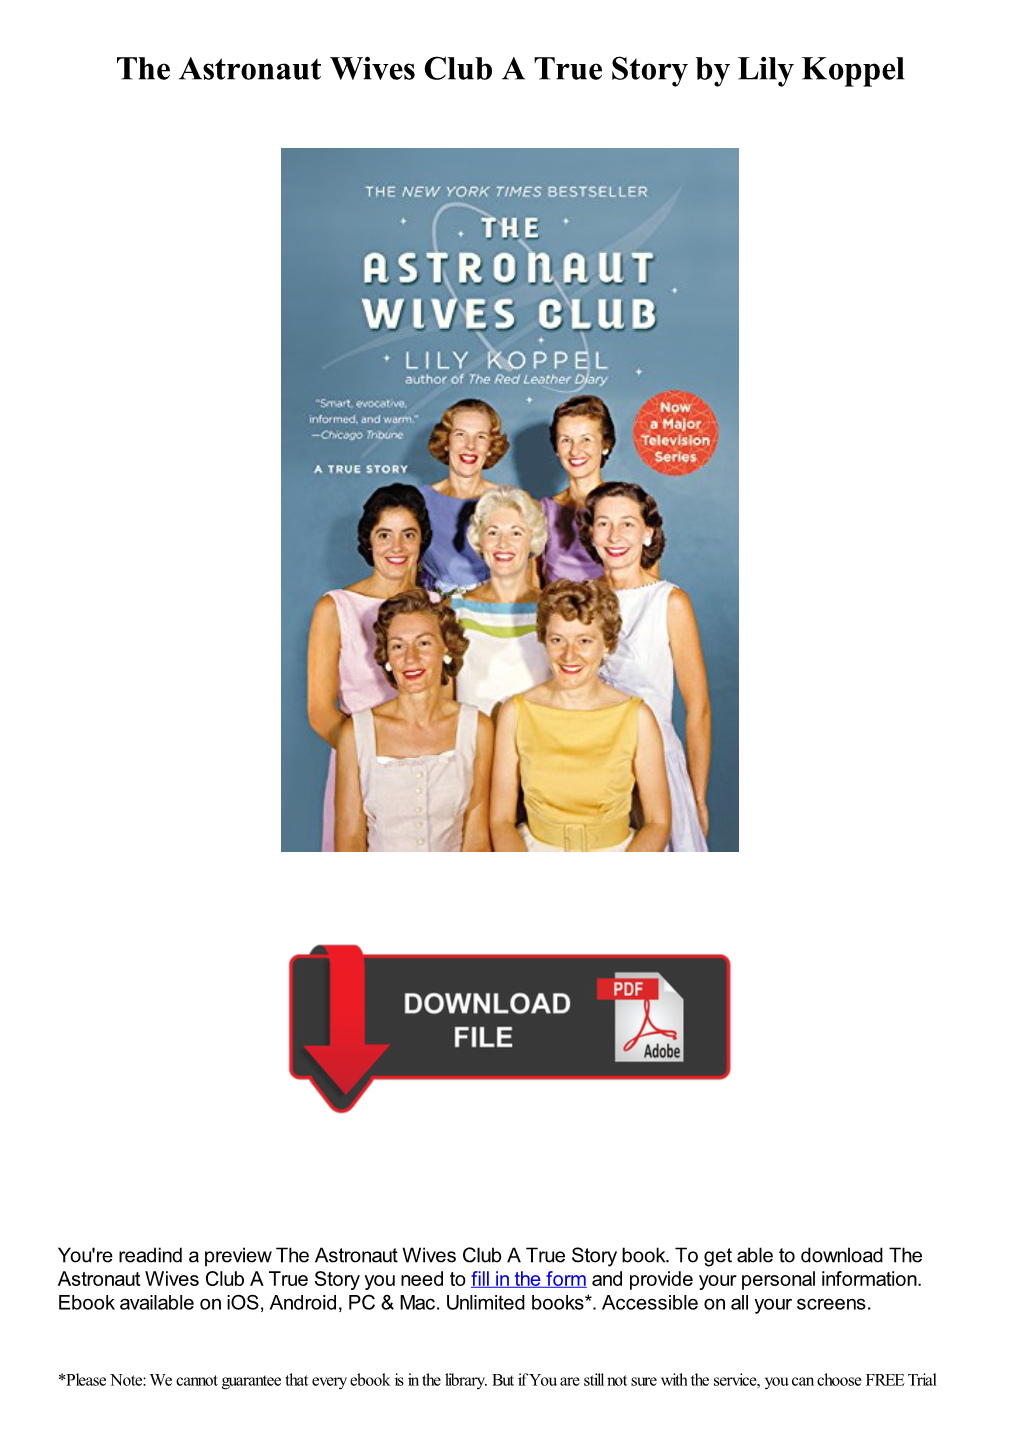 The Astronaut Wives Club a True Story by Lily Koppel